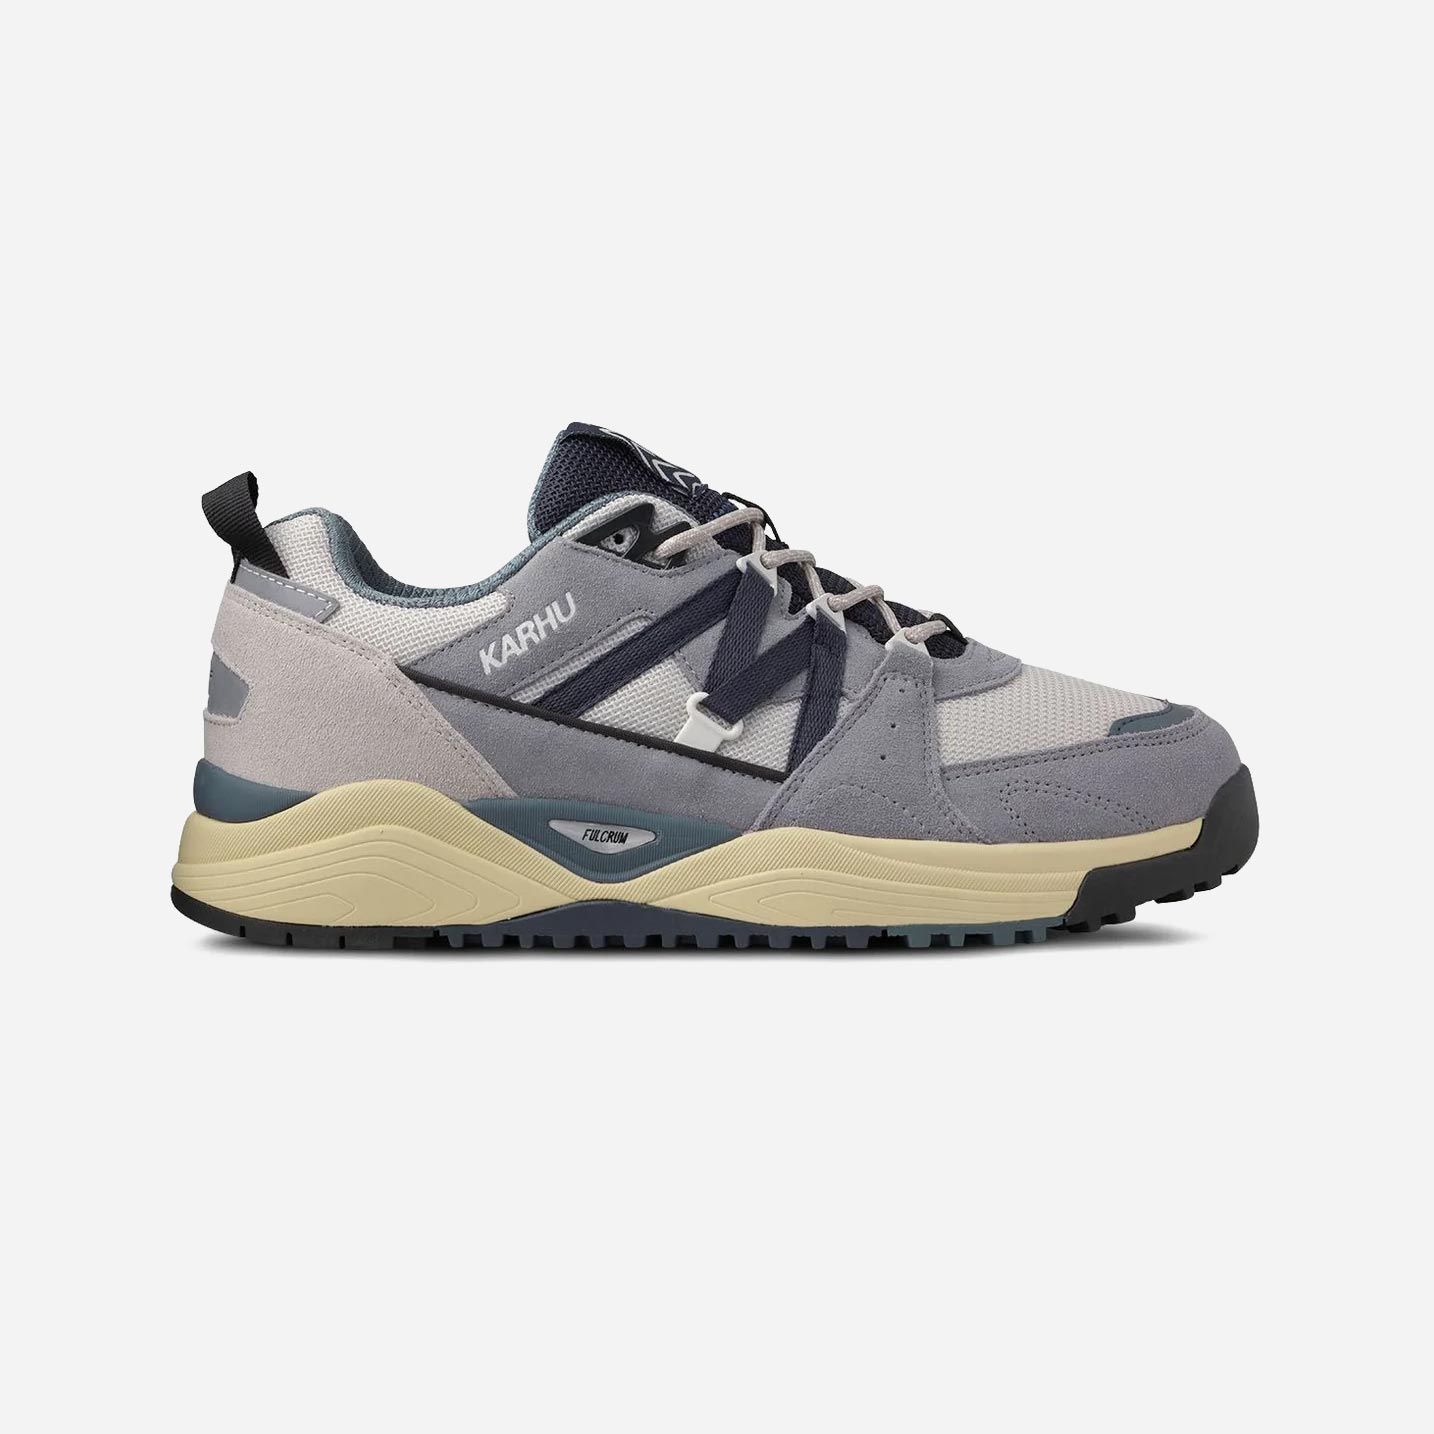 Karhu Fusion XC Trainer - Ultimate Gray/India Ink